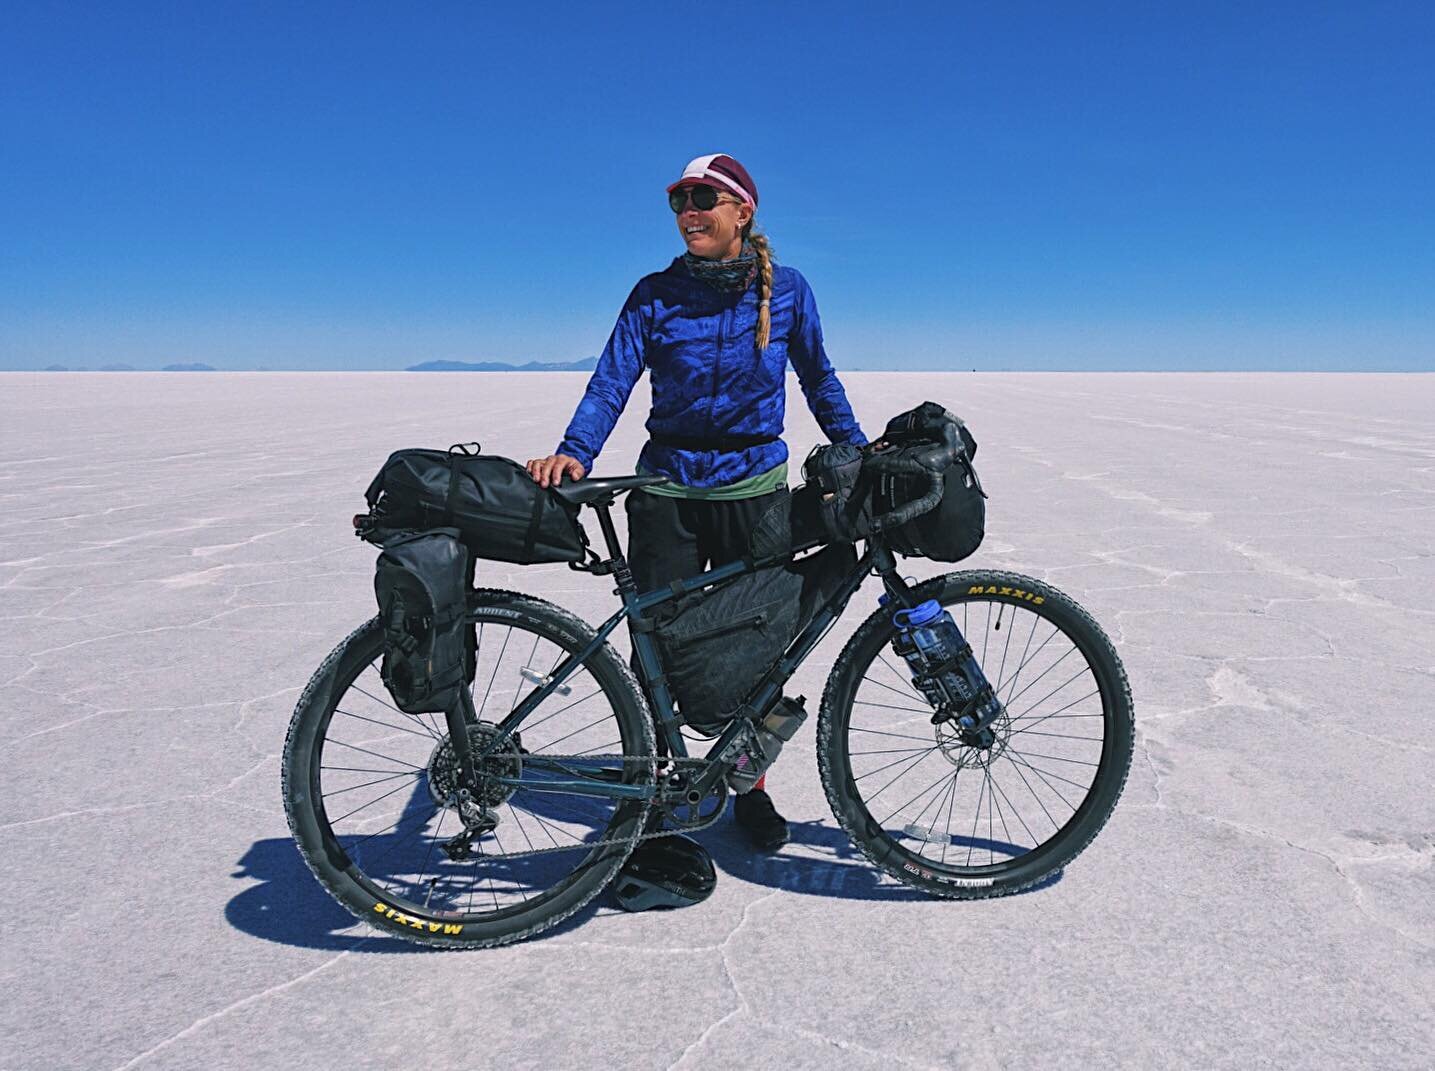 There are certain places on this planet that seem like a distant dream.

Something about their mystery stops us in our tracks.

For many cyclists, Bolivia&rsquo;s Salar de Uyuni is a fairytale. 

The world&rsquo;s largest salt flats, expansive and ot